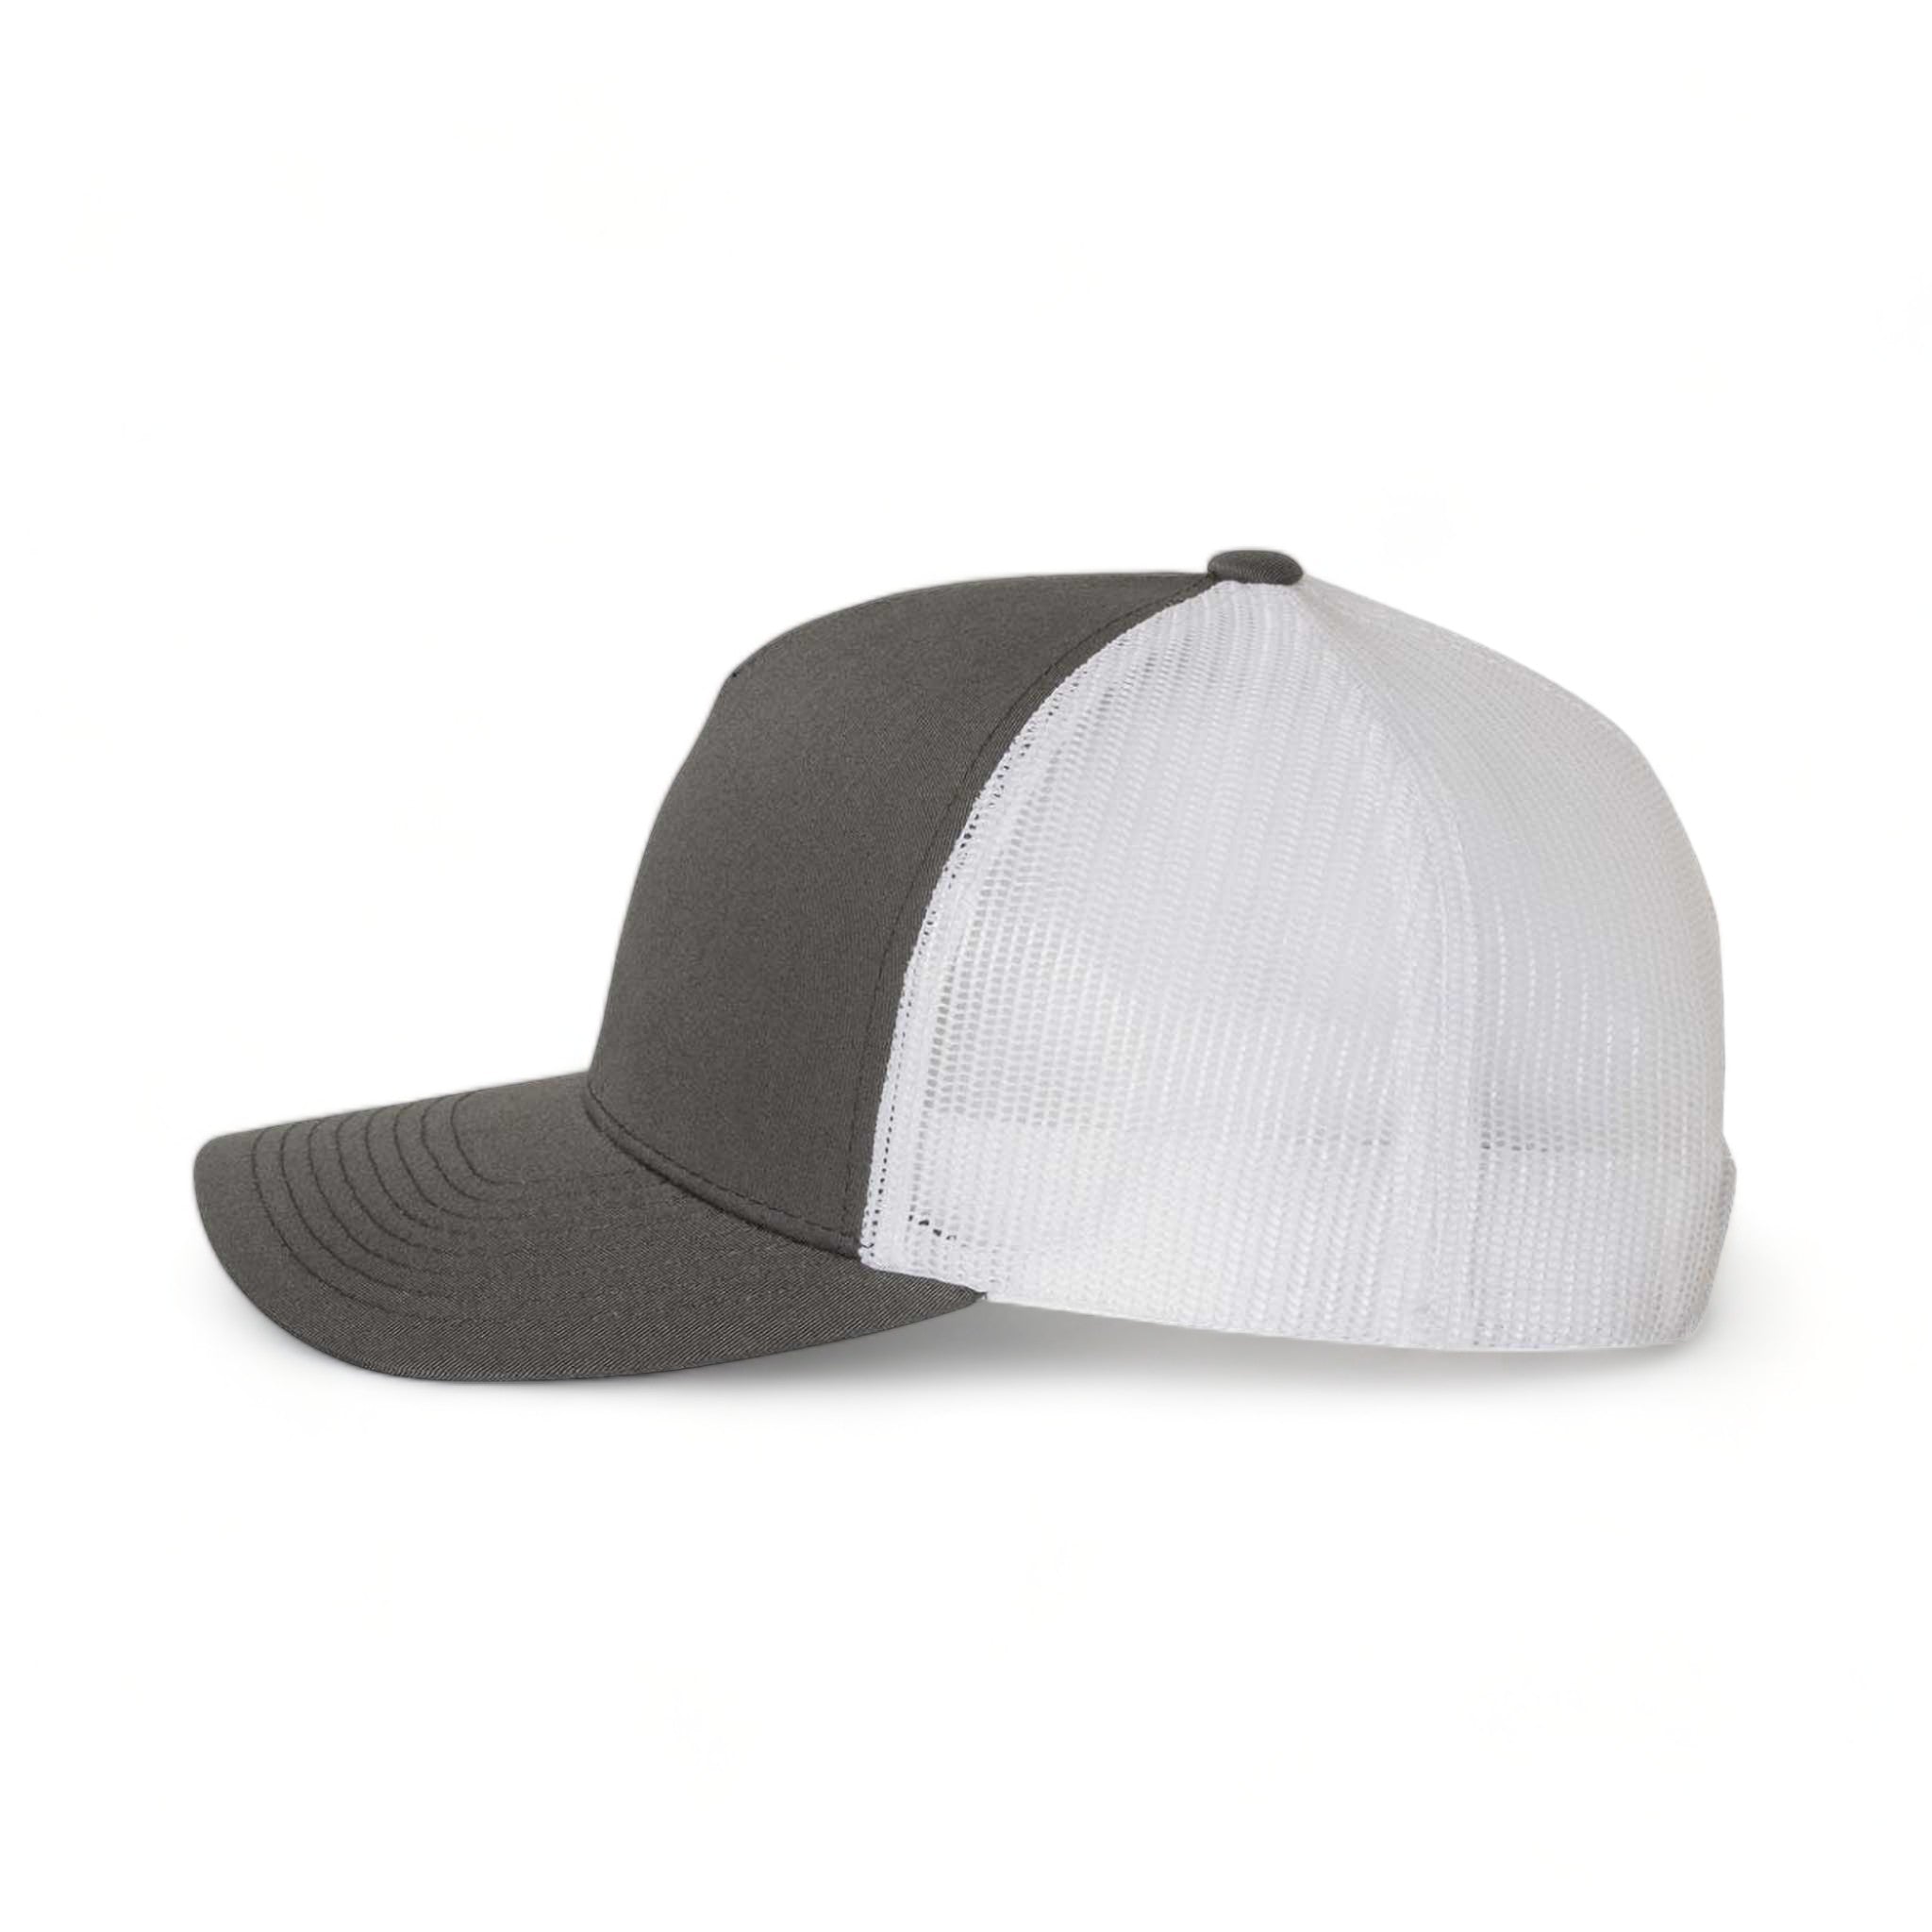 Side view of YP Classics 6506 custom hat in charcoal and white